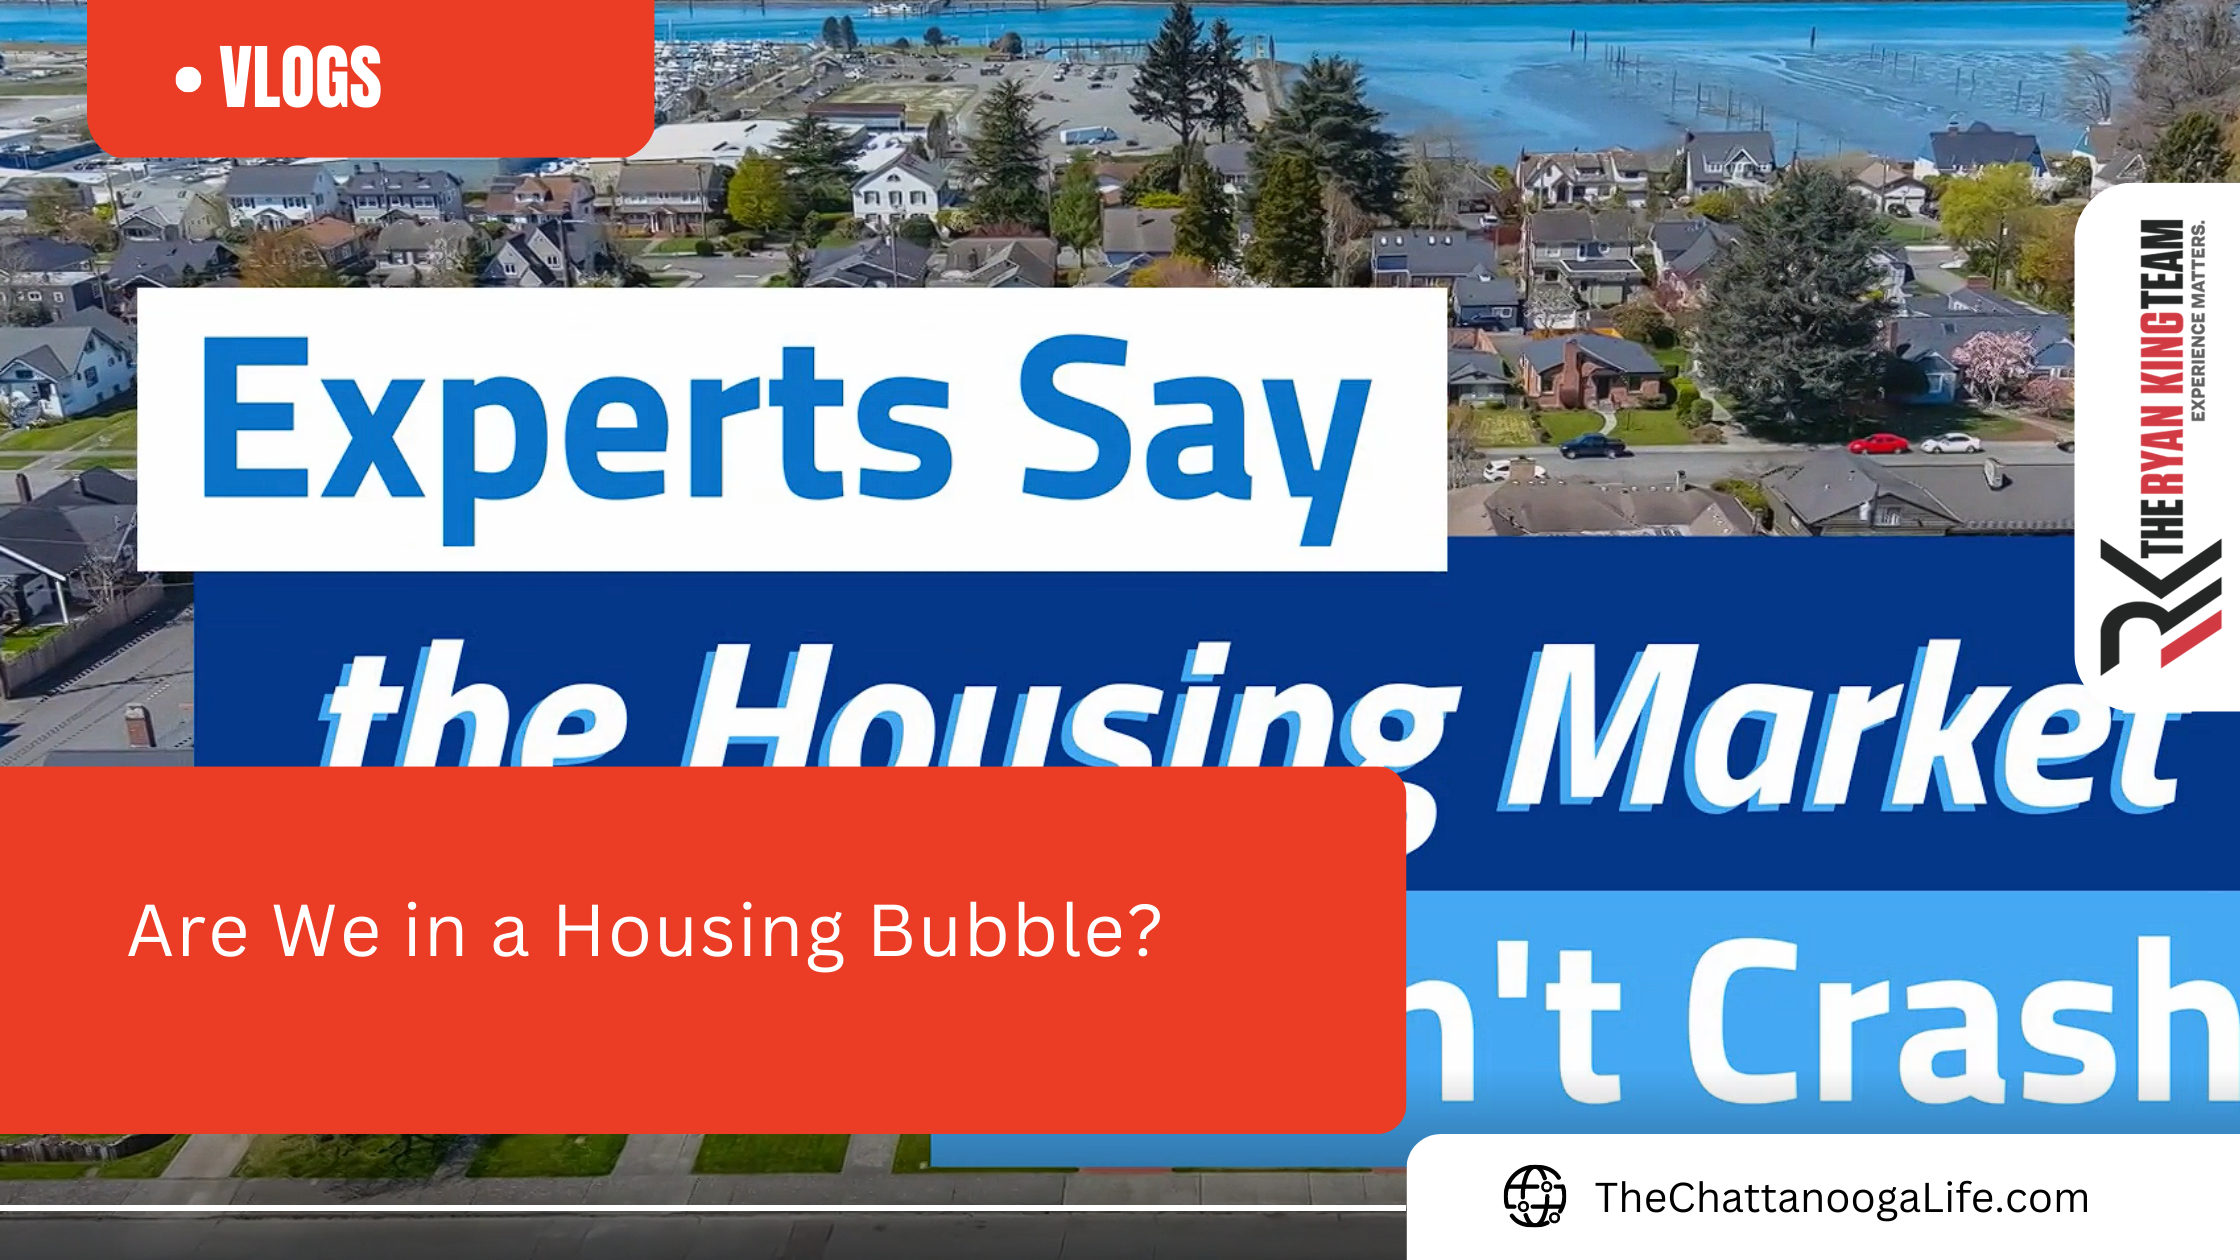 Are We in a Housing Bubble